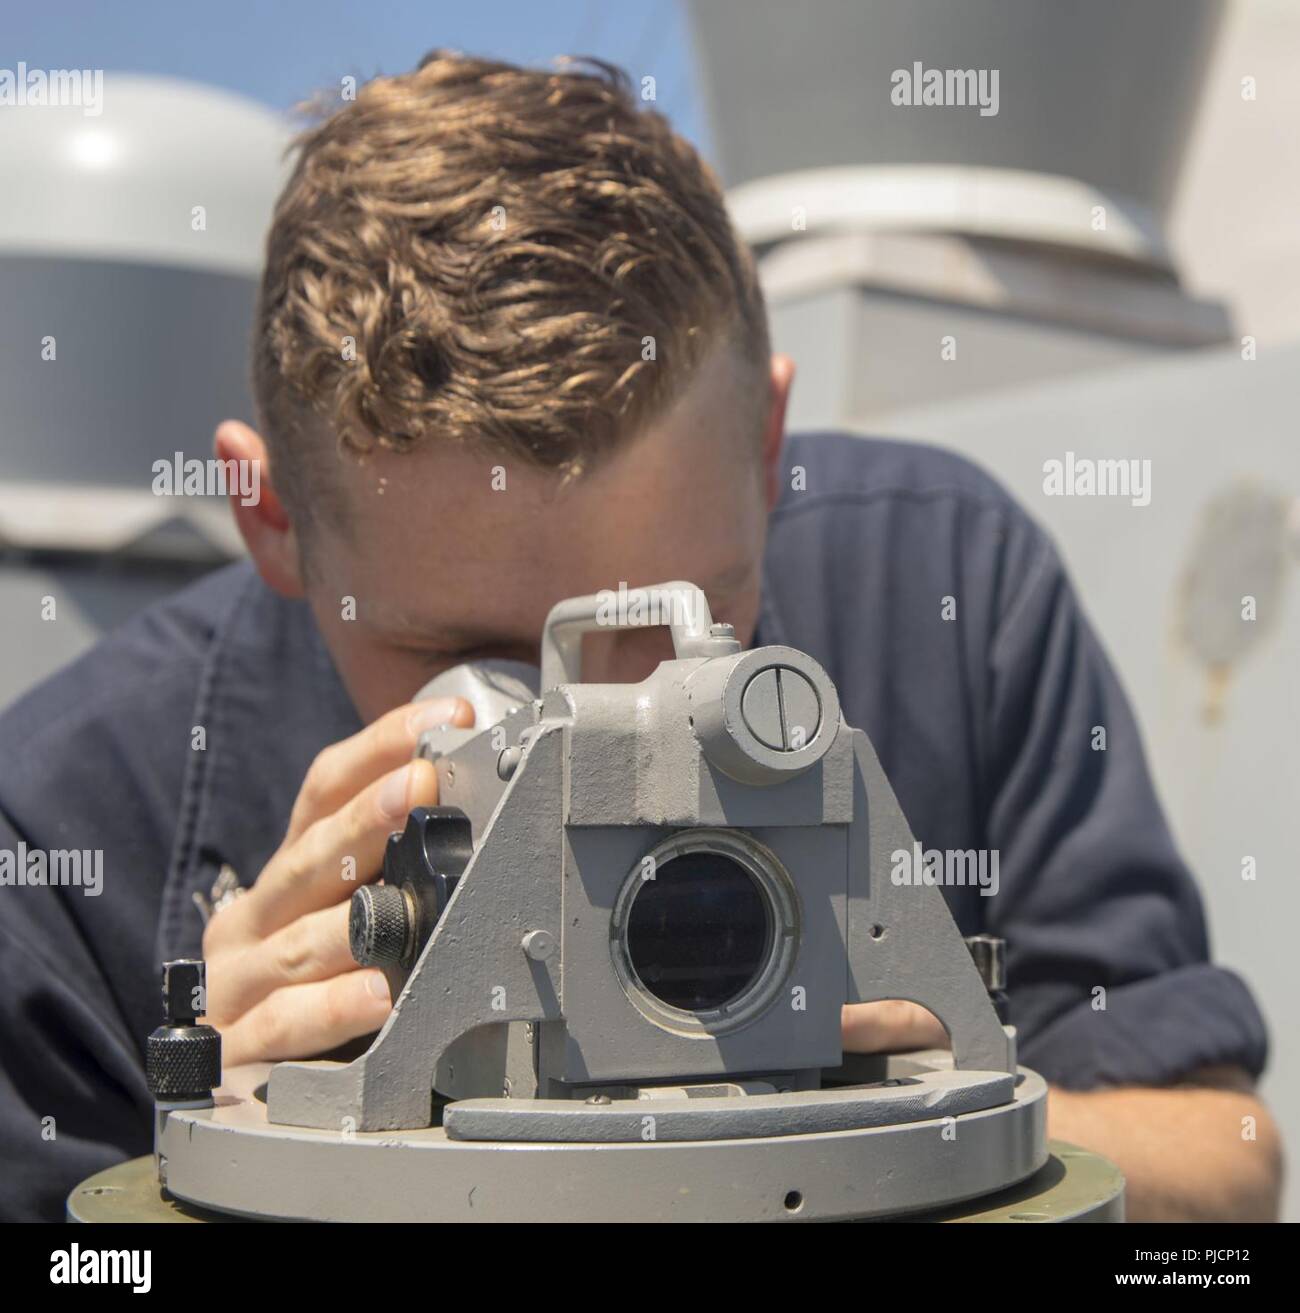 MEDITERRANEAN SEA (July 20, 2018) Quartermaster 3rd Class Gregory Morgan, from Denver, looks through the telescopic alidade on the bridge wing of the San Antonio-class amphibious transport dock ship USS New York (LPD 21) July 20, 2018. New York, homeported in Mayport, Florida, is conducting naval operations in the U.S. 6th Fleet area of operations in support of U.S. national security interests in Europe and Africa. Stock Photo